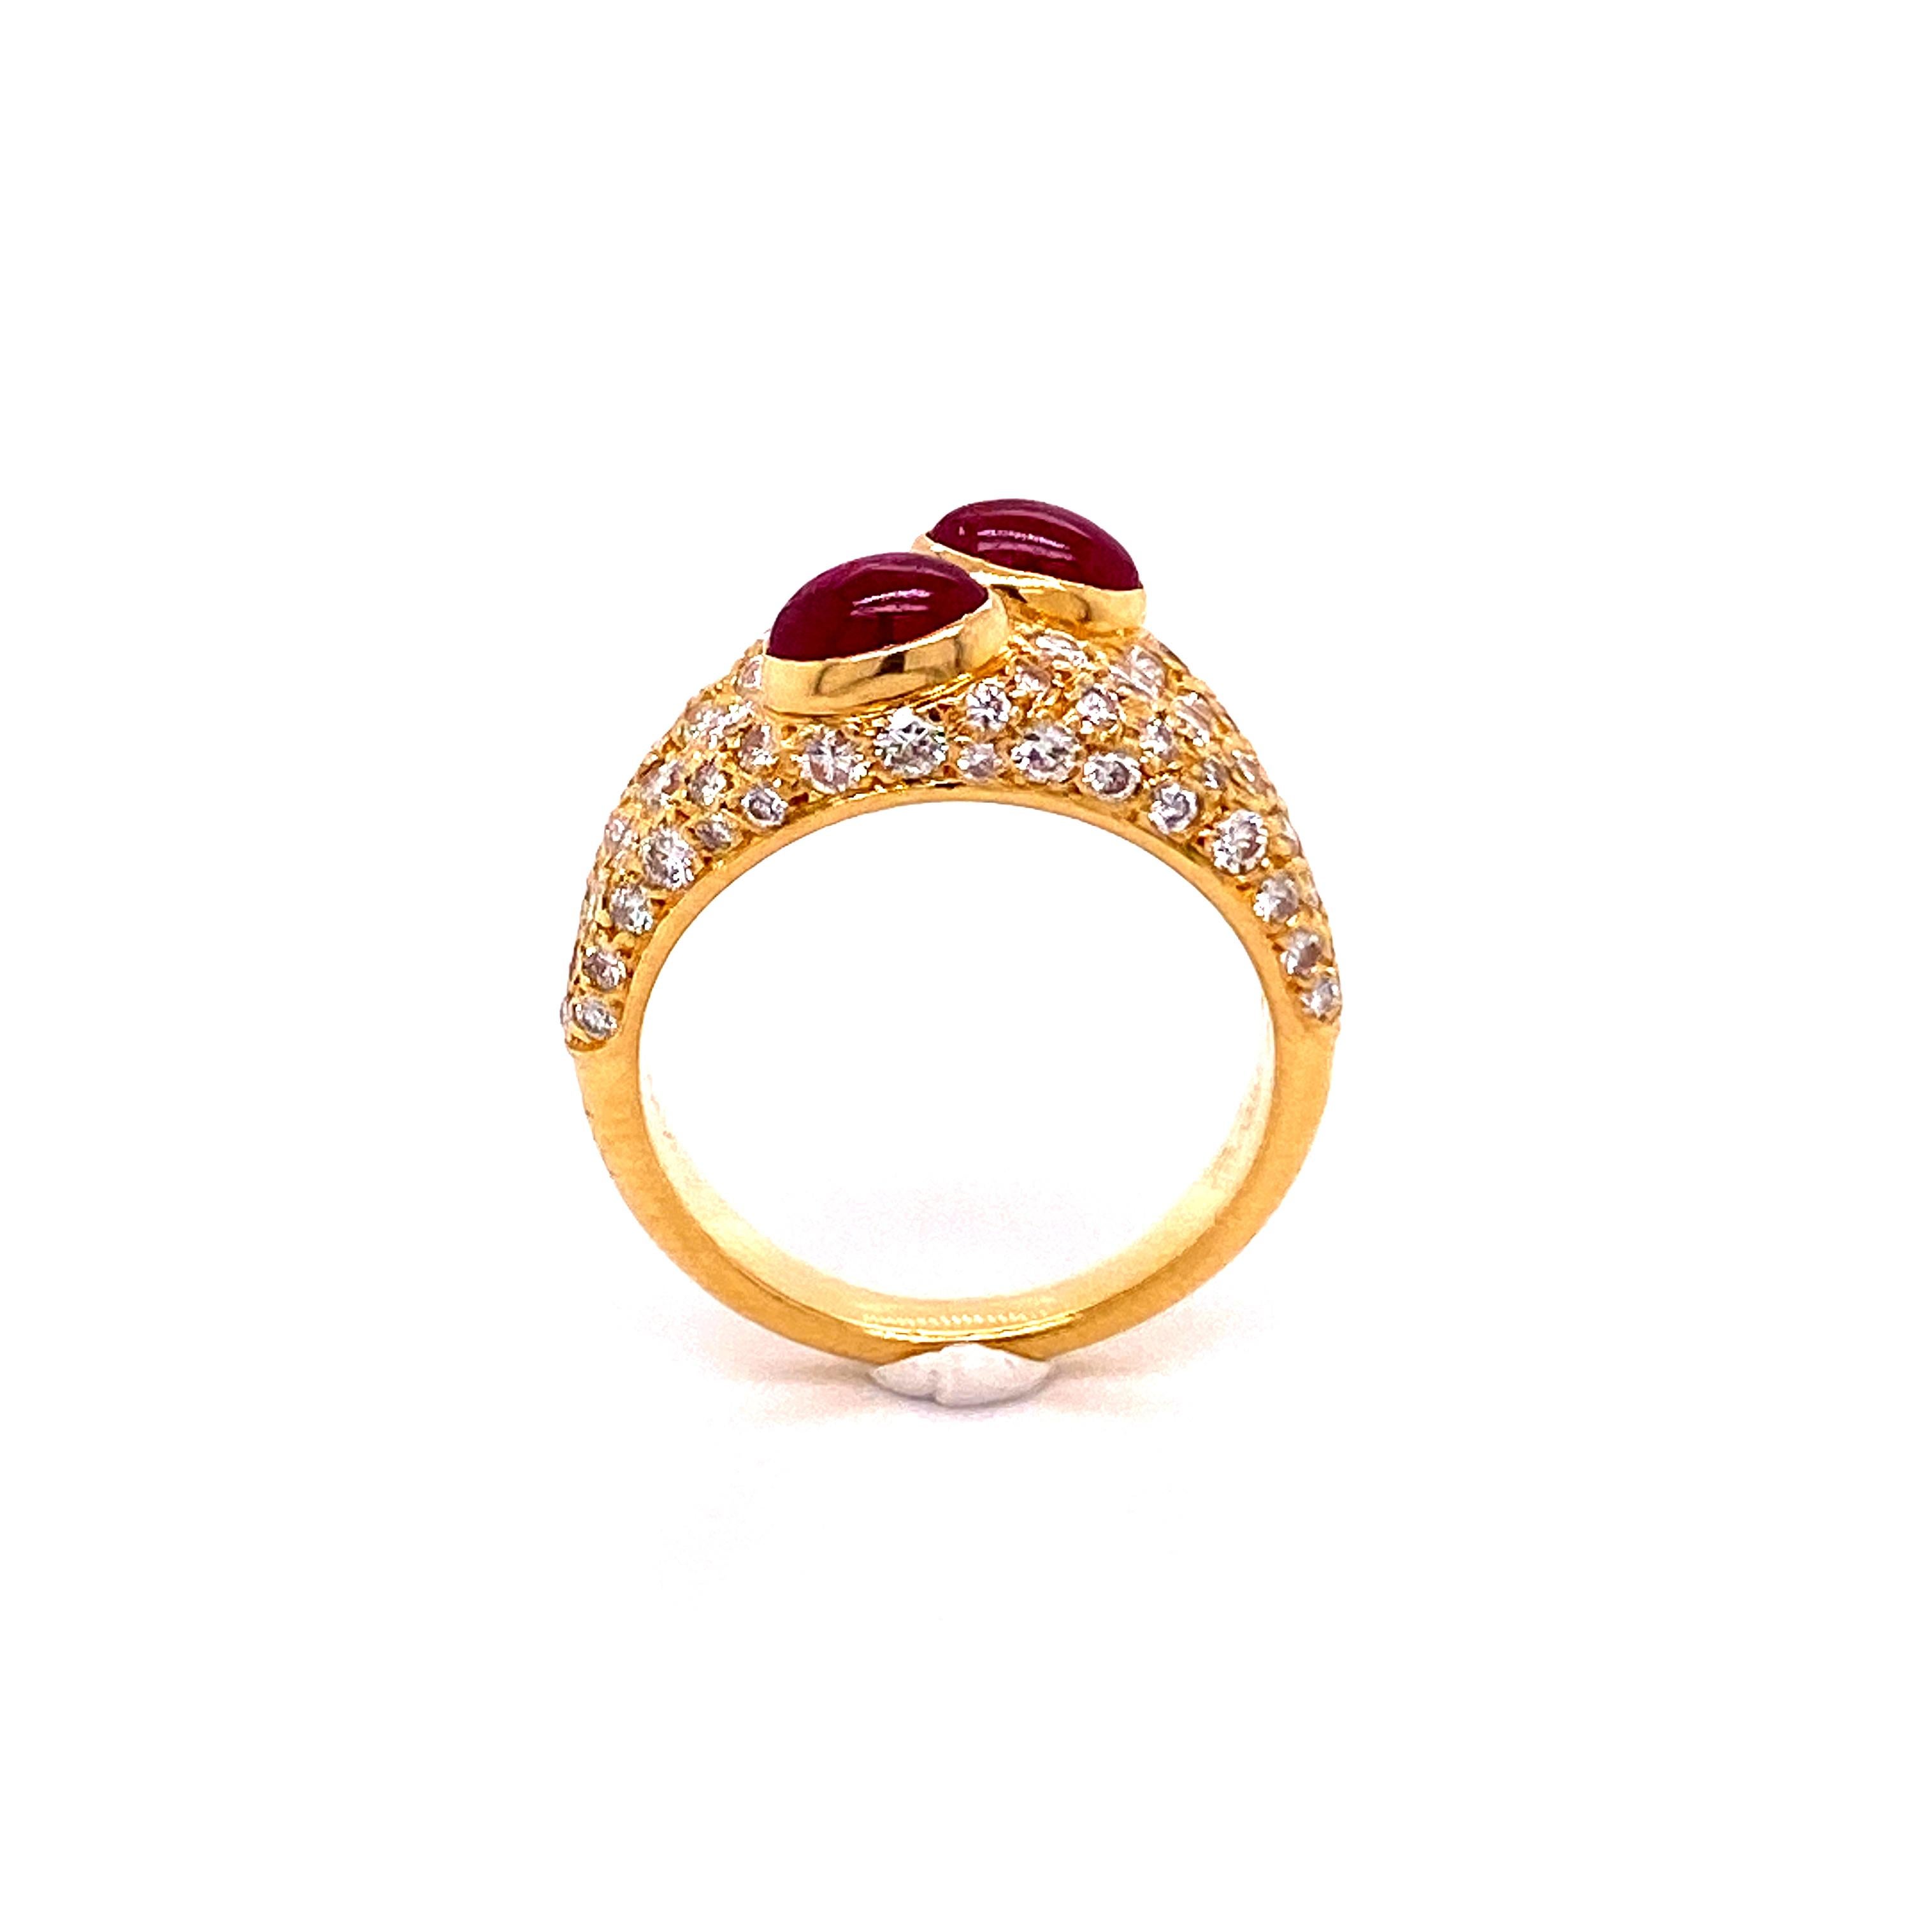 Modern Cartier Ruby and Diamond Ring in 18 Karat Yellow Gold